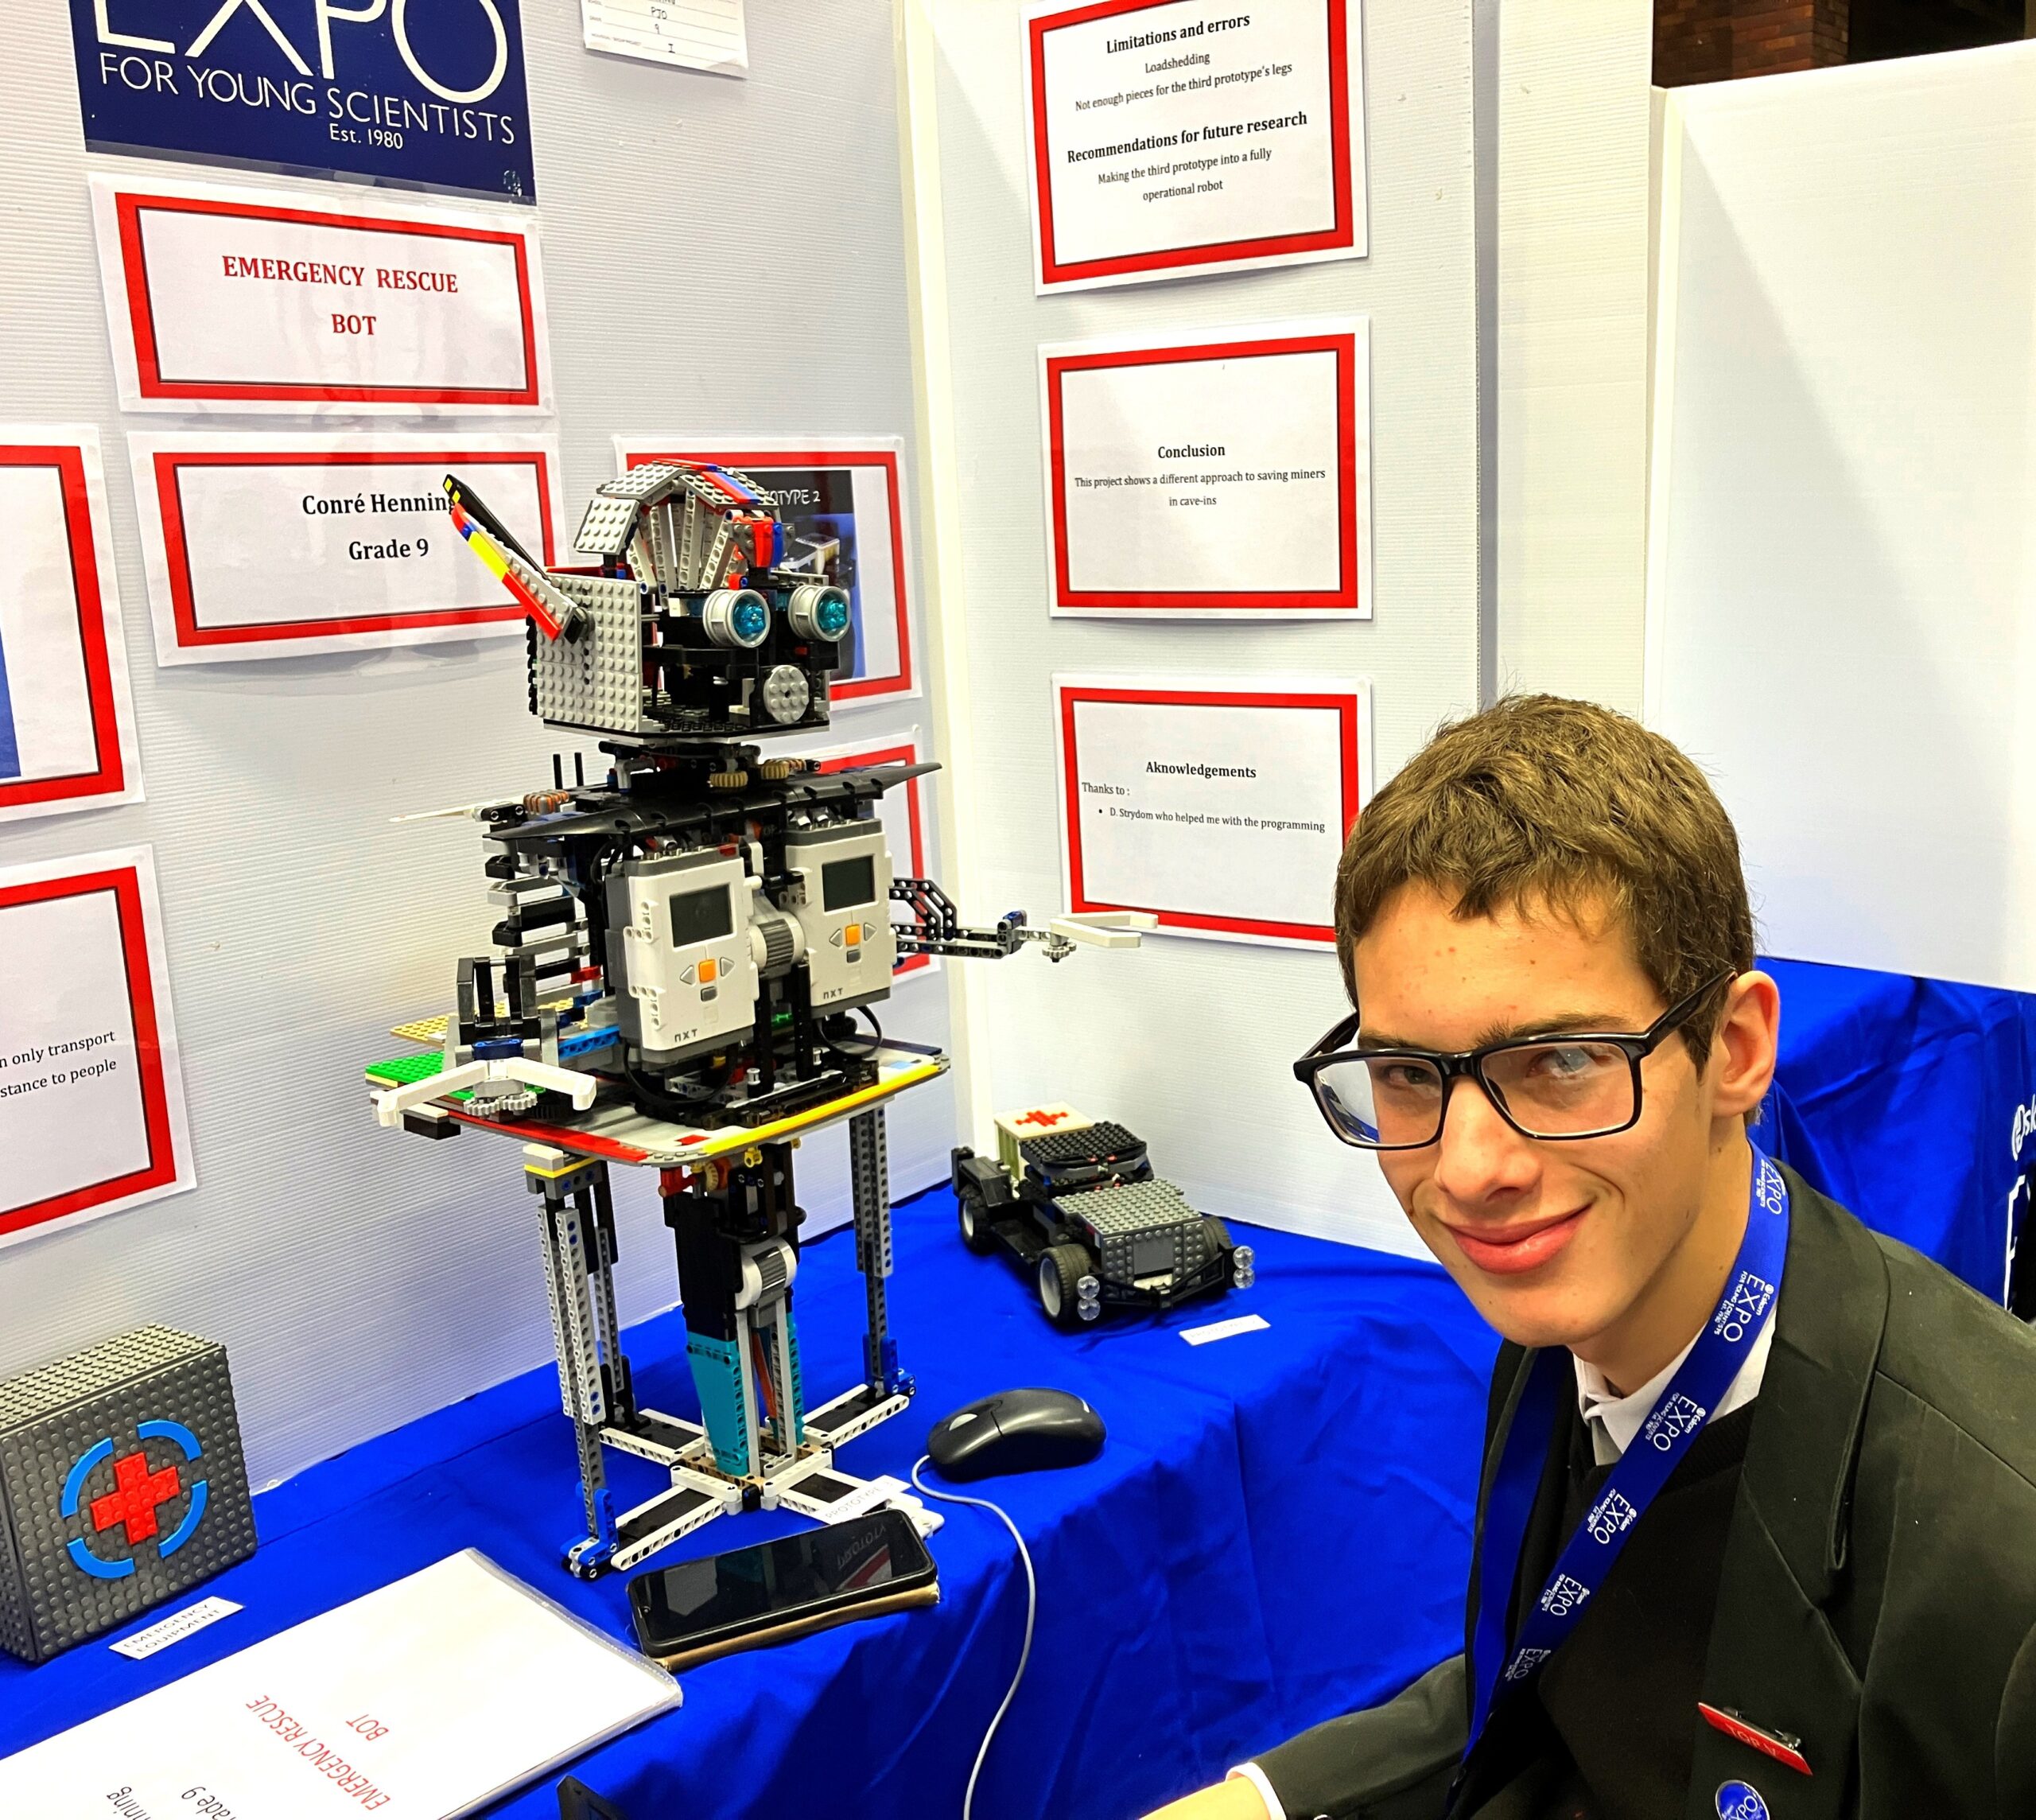 Conré Henning, a grade nine pupil from PJ Olivier School won a gold medal with his ‘Emergency Rescue Bot’ entry designed to carry out missions in a mining cave-in. Photo: Steven Lang